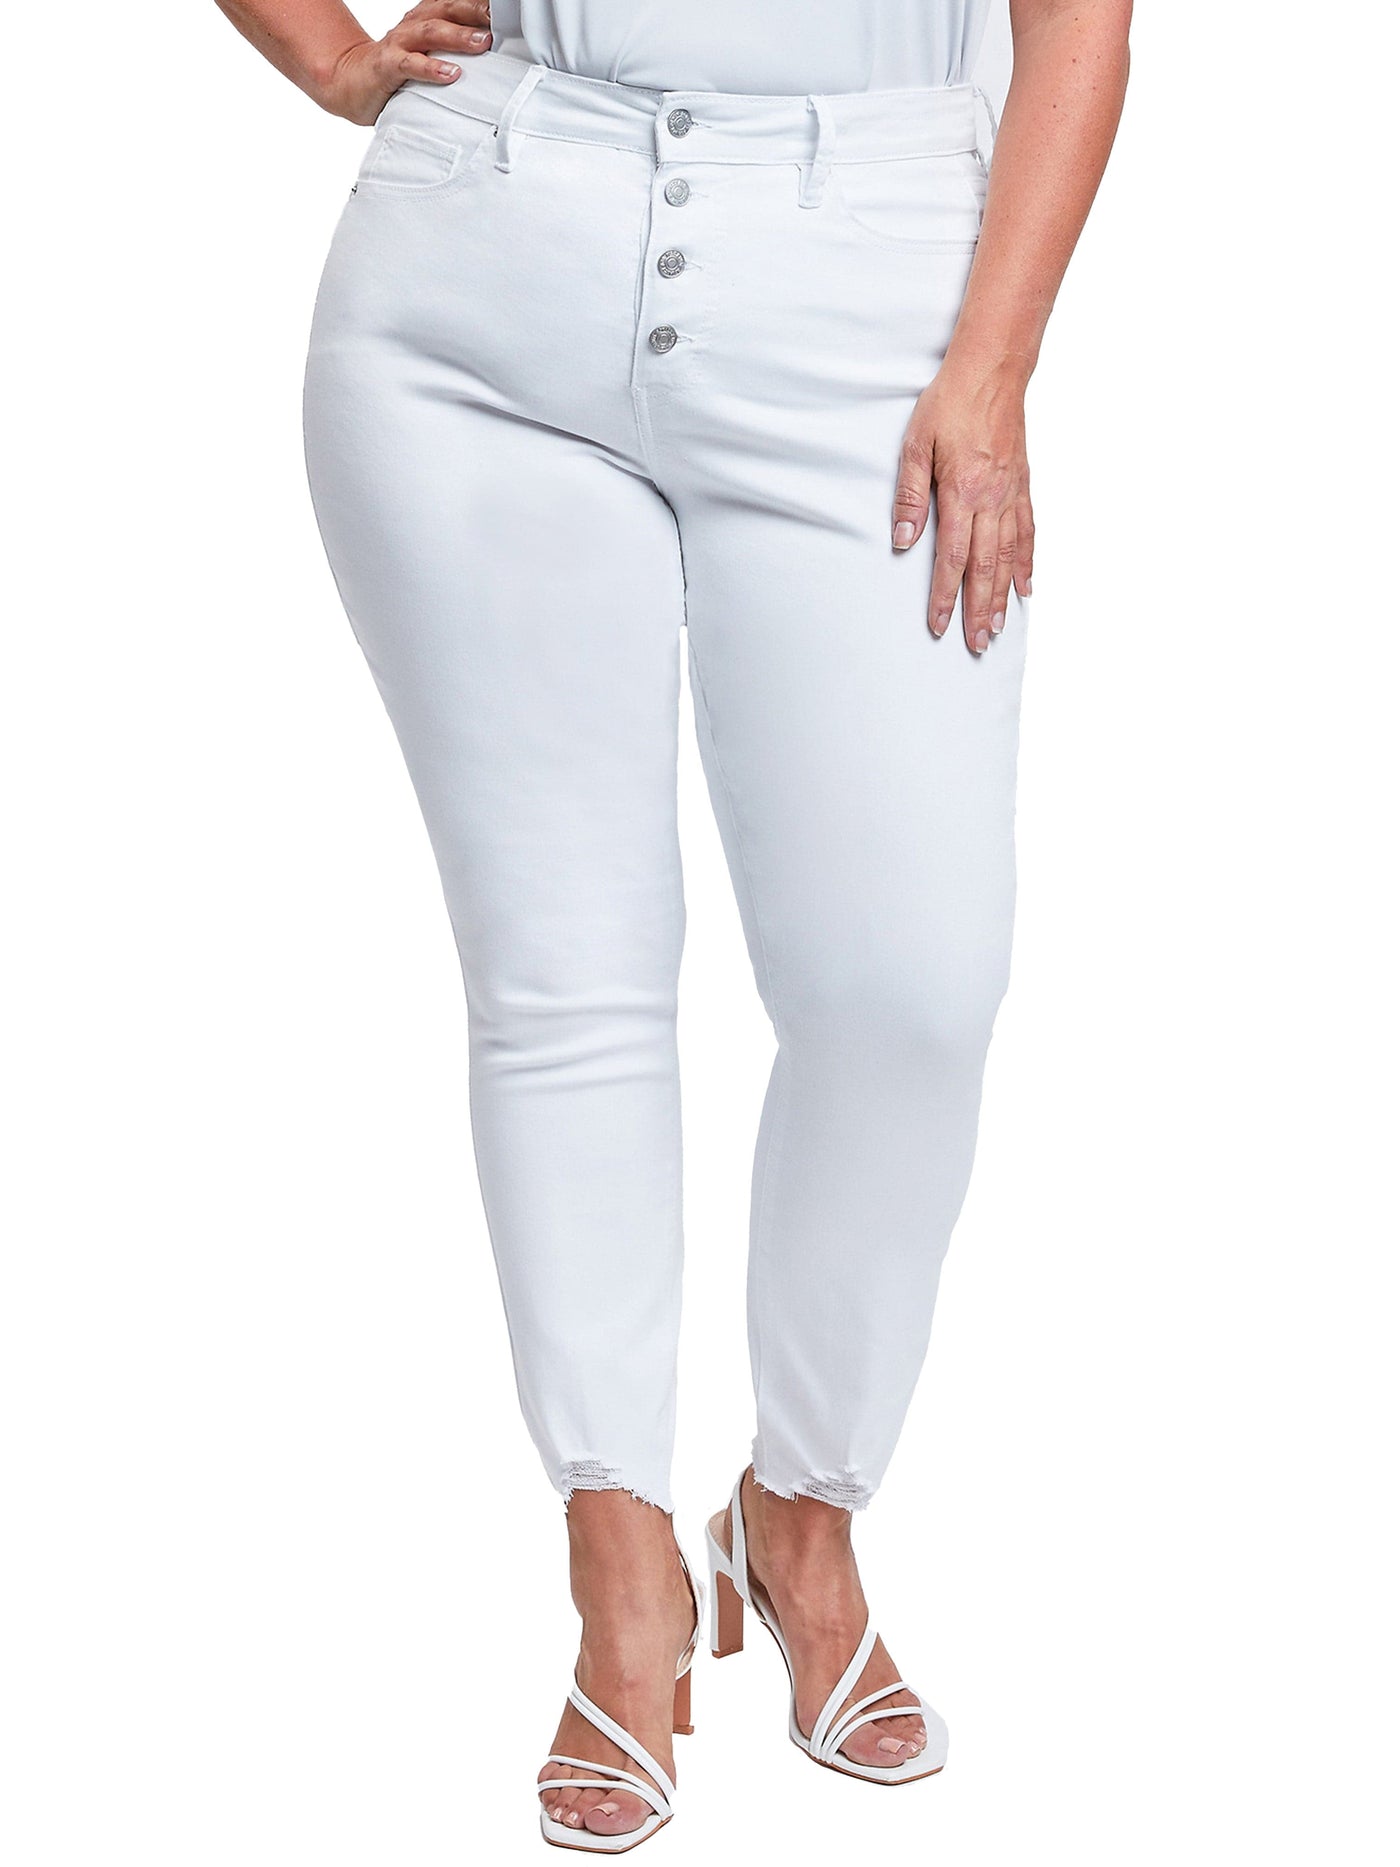 Women's Plus Size Sustainable Button Fly Skinny Jeans